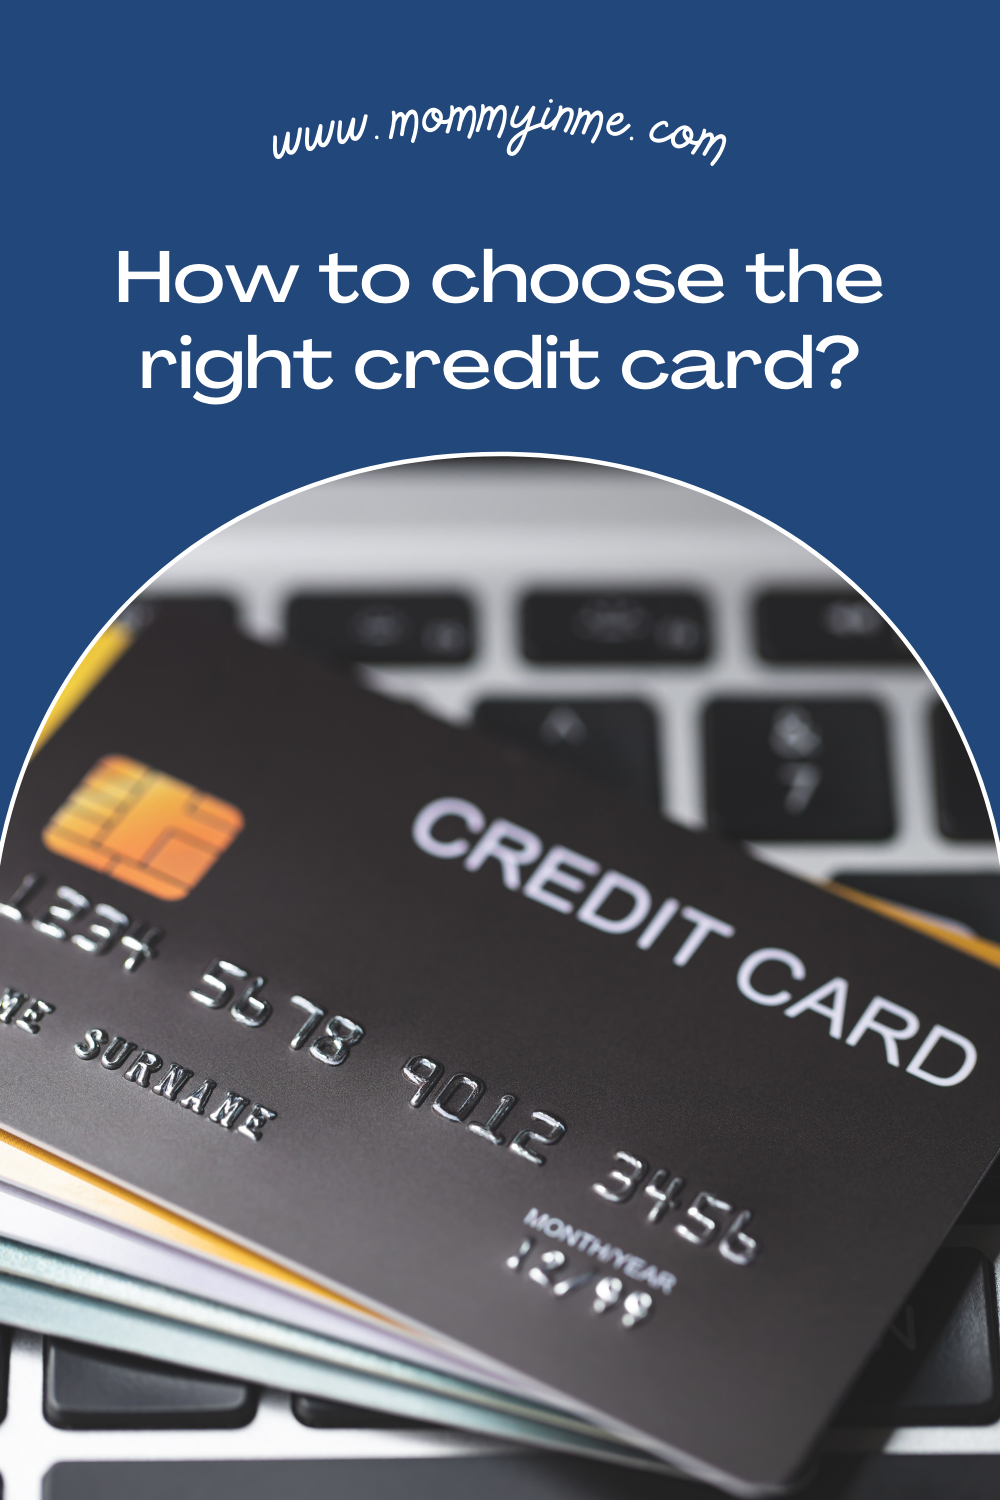 Choosing the right credit card basis our lifestyle and financial goals is important. Consider these points before opting for credit card #creditcards #bestcreditcard #graceperiod #MoneymantrawithJhilmil #financialawareness